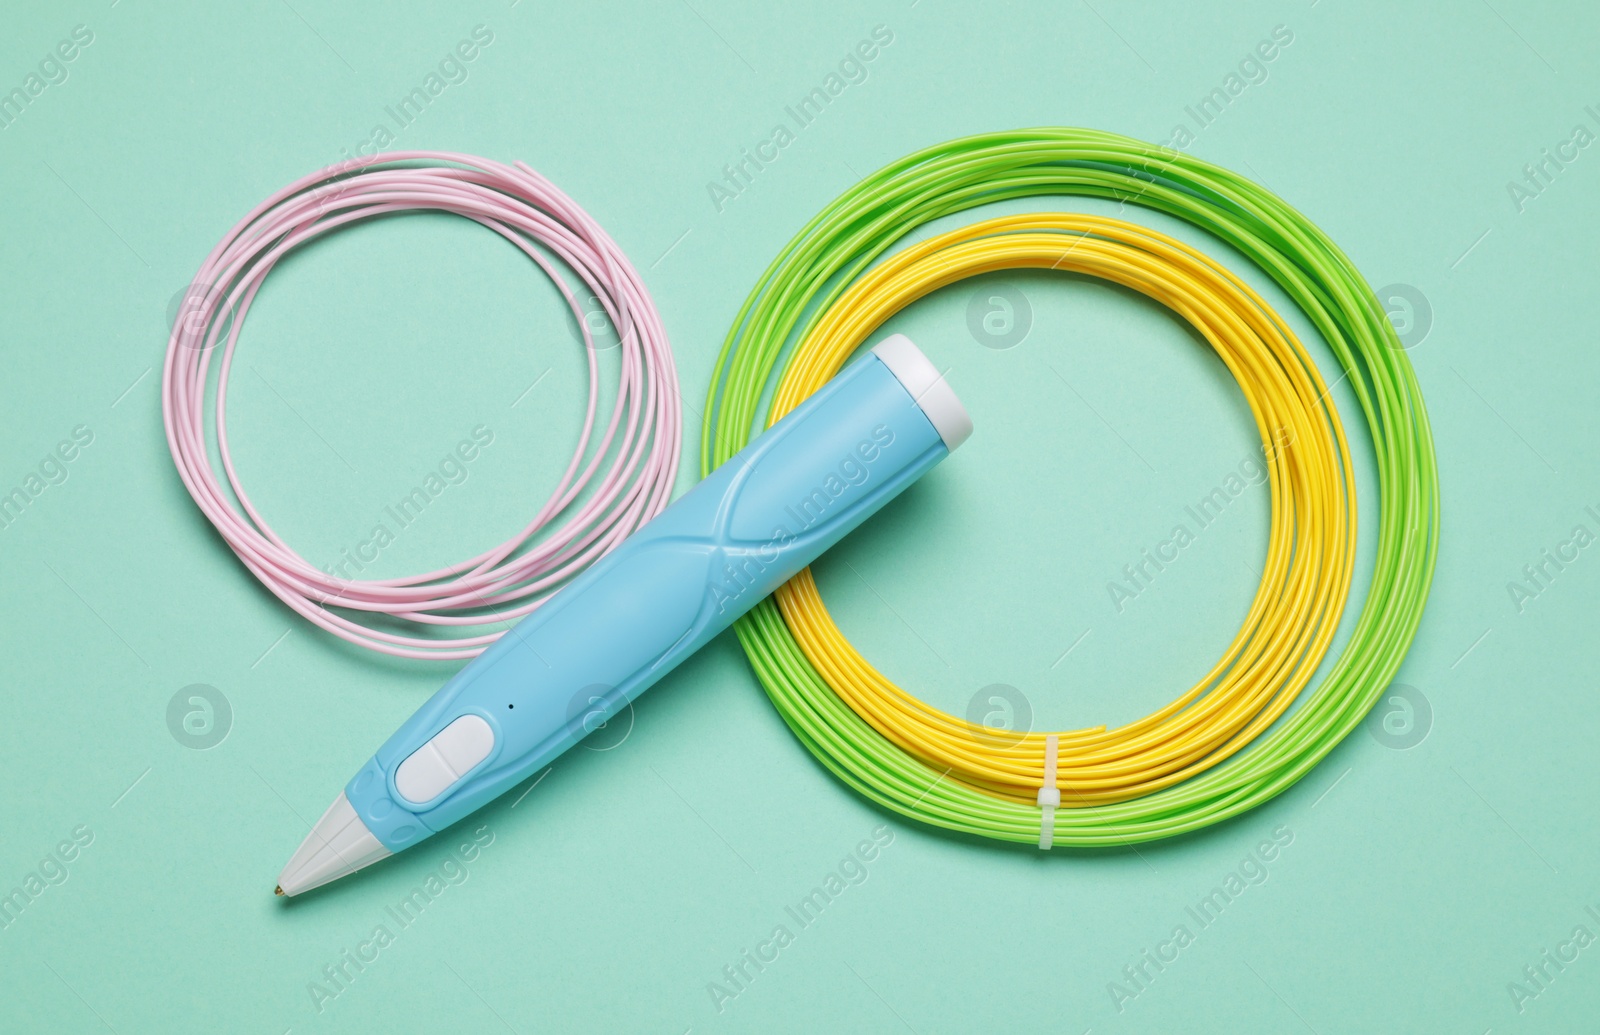 Photo of Stylish 3D pen and colorful plastic filaments on turquoise background, flat lay